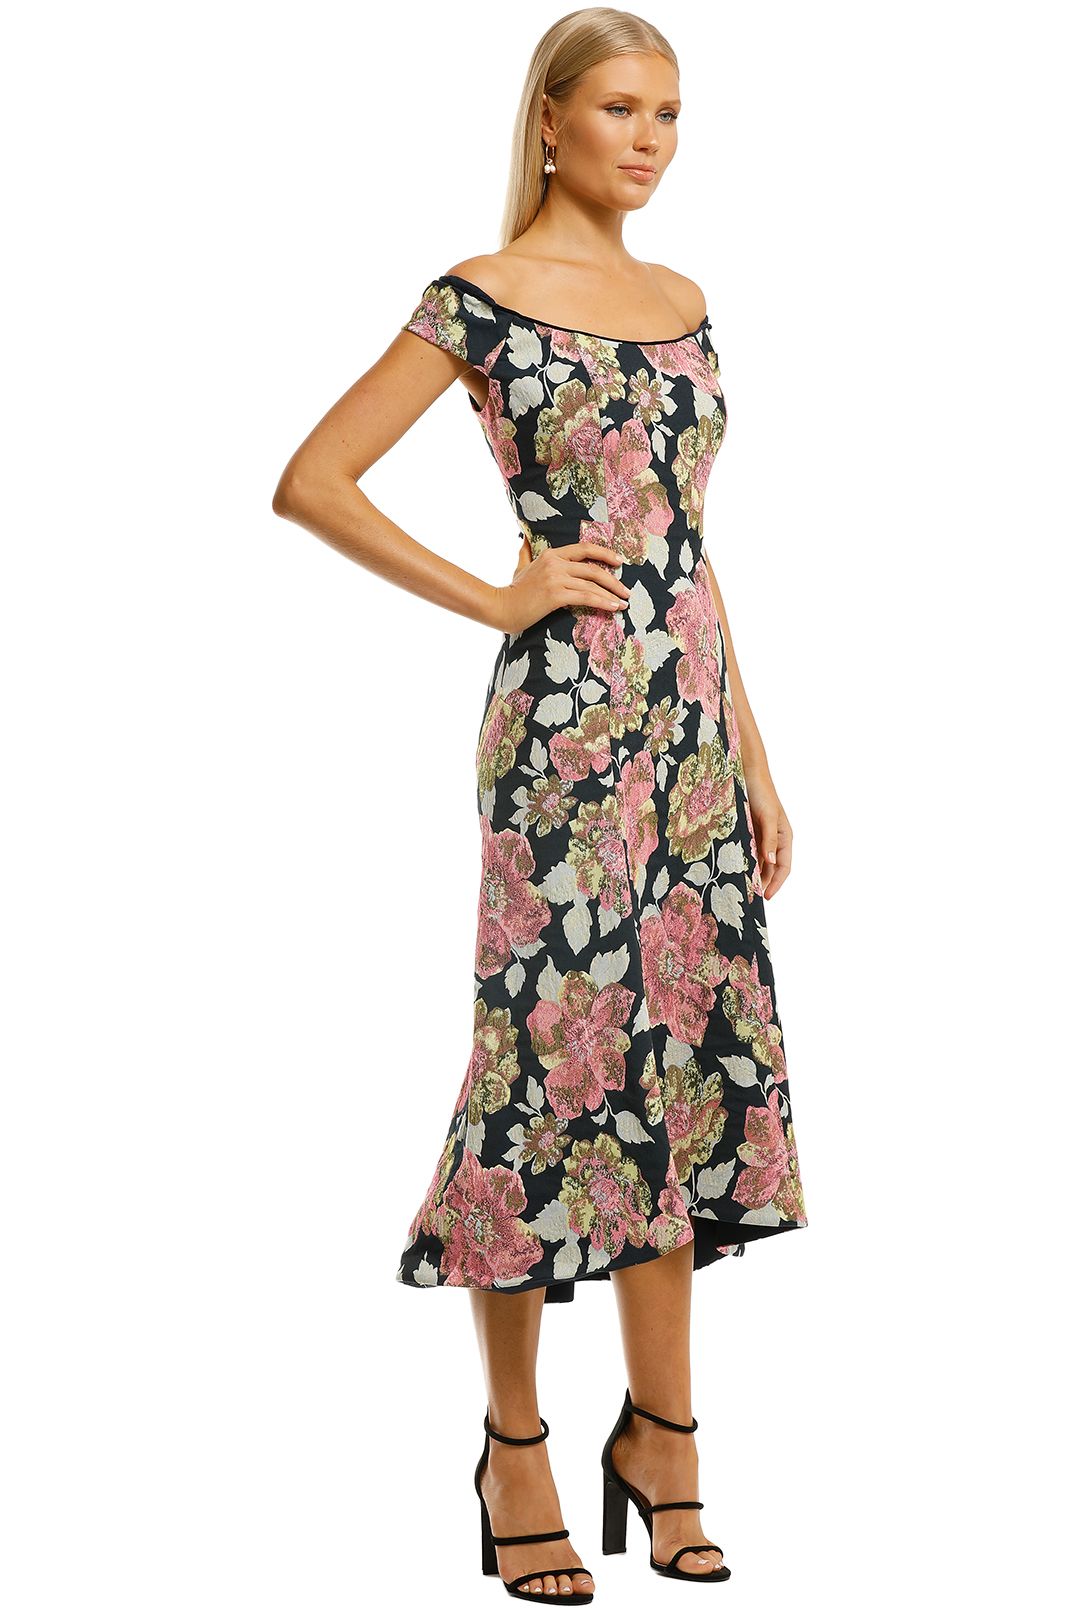 Moss-and-Spy-Beatrice-Midi-A-Line-Dress-Floral-Side